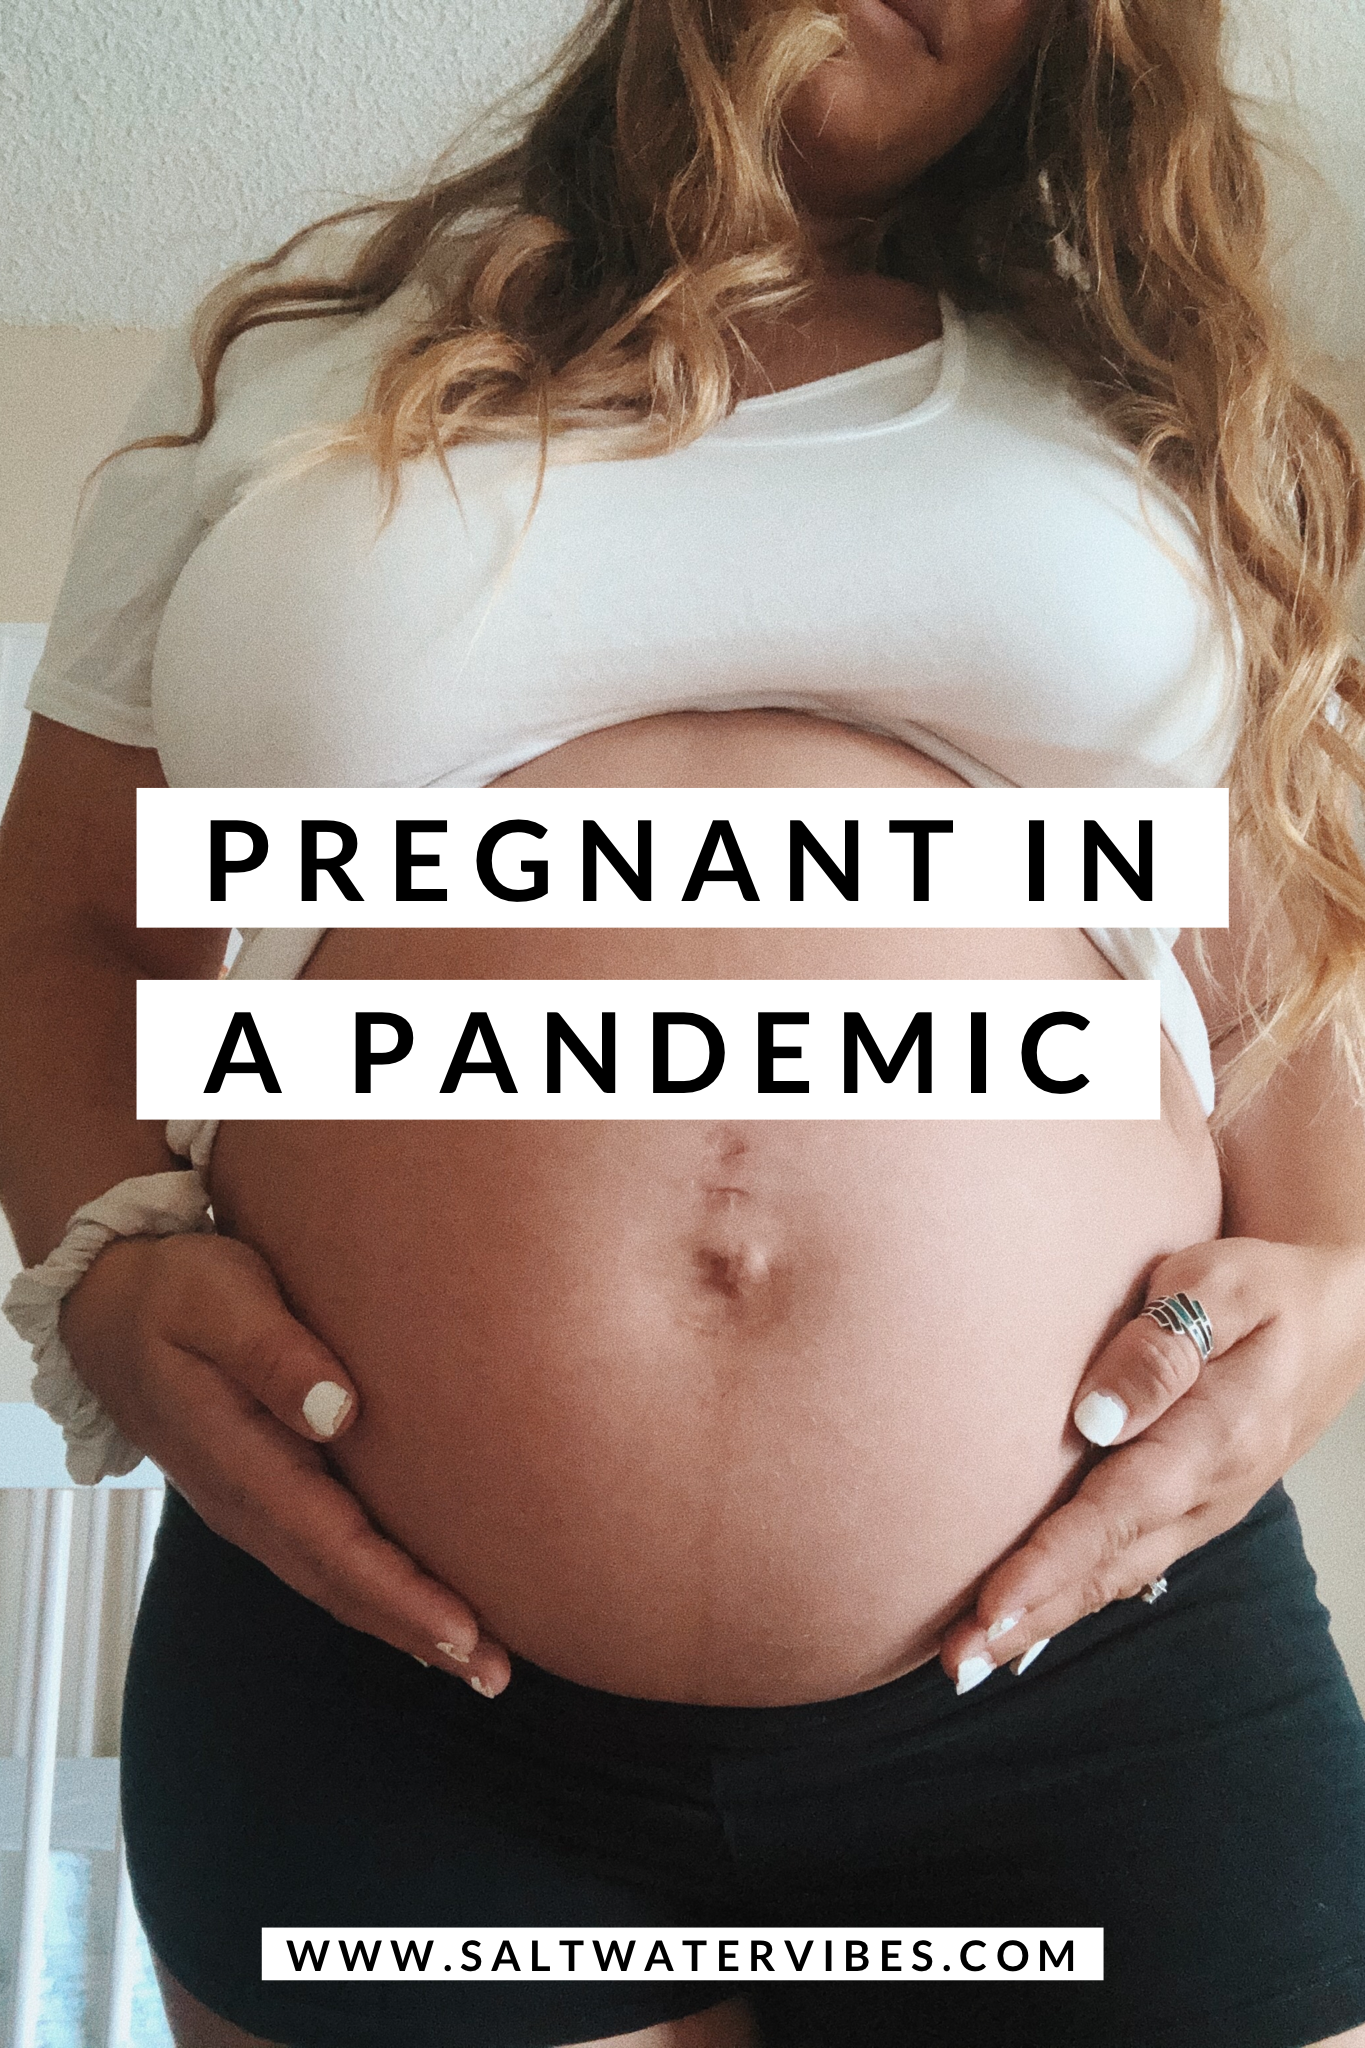 Pregnant In a Pandemic | SaltWaterVibes